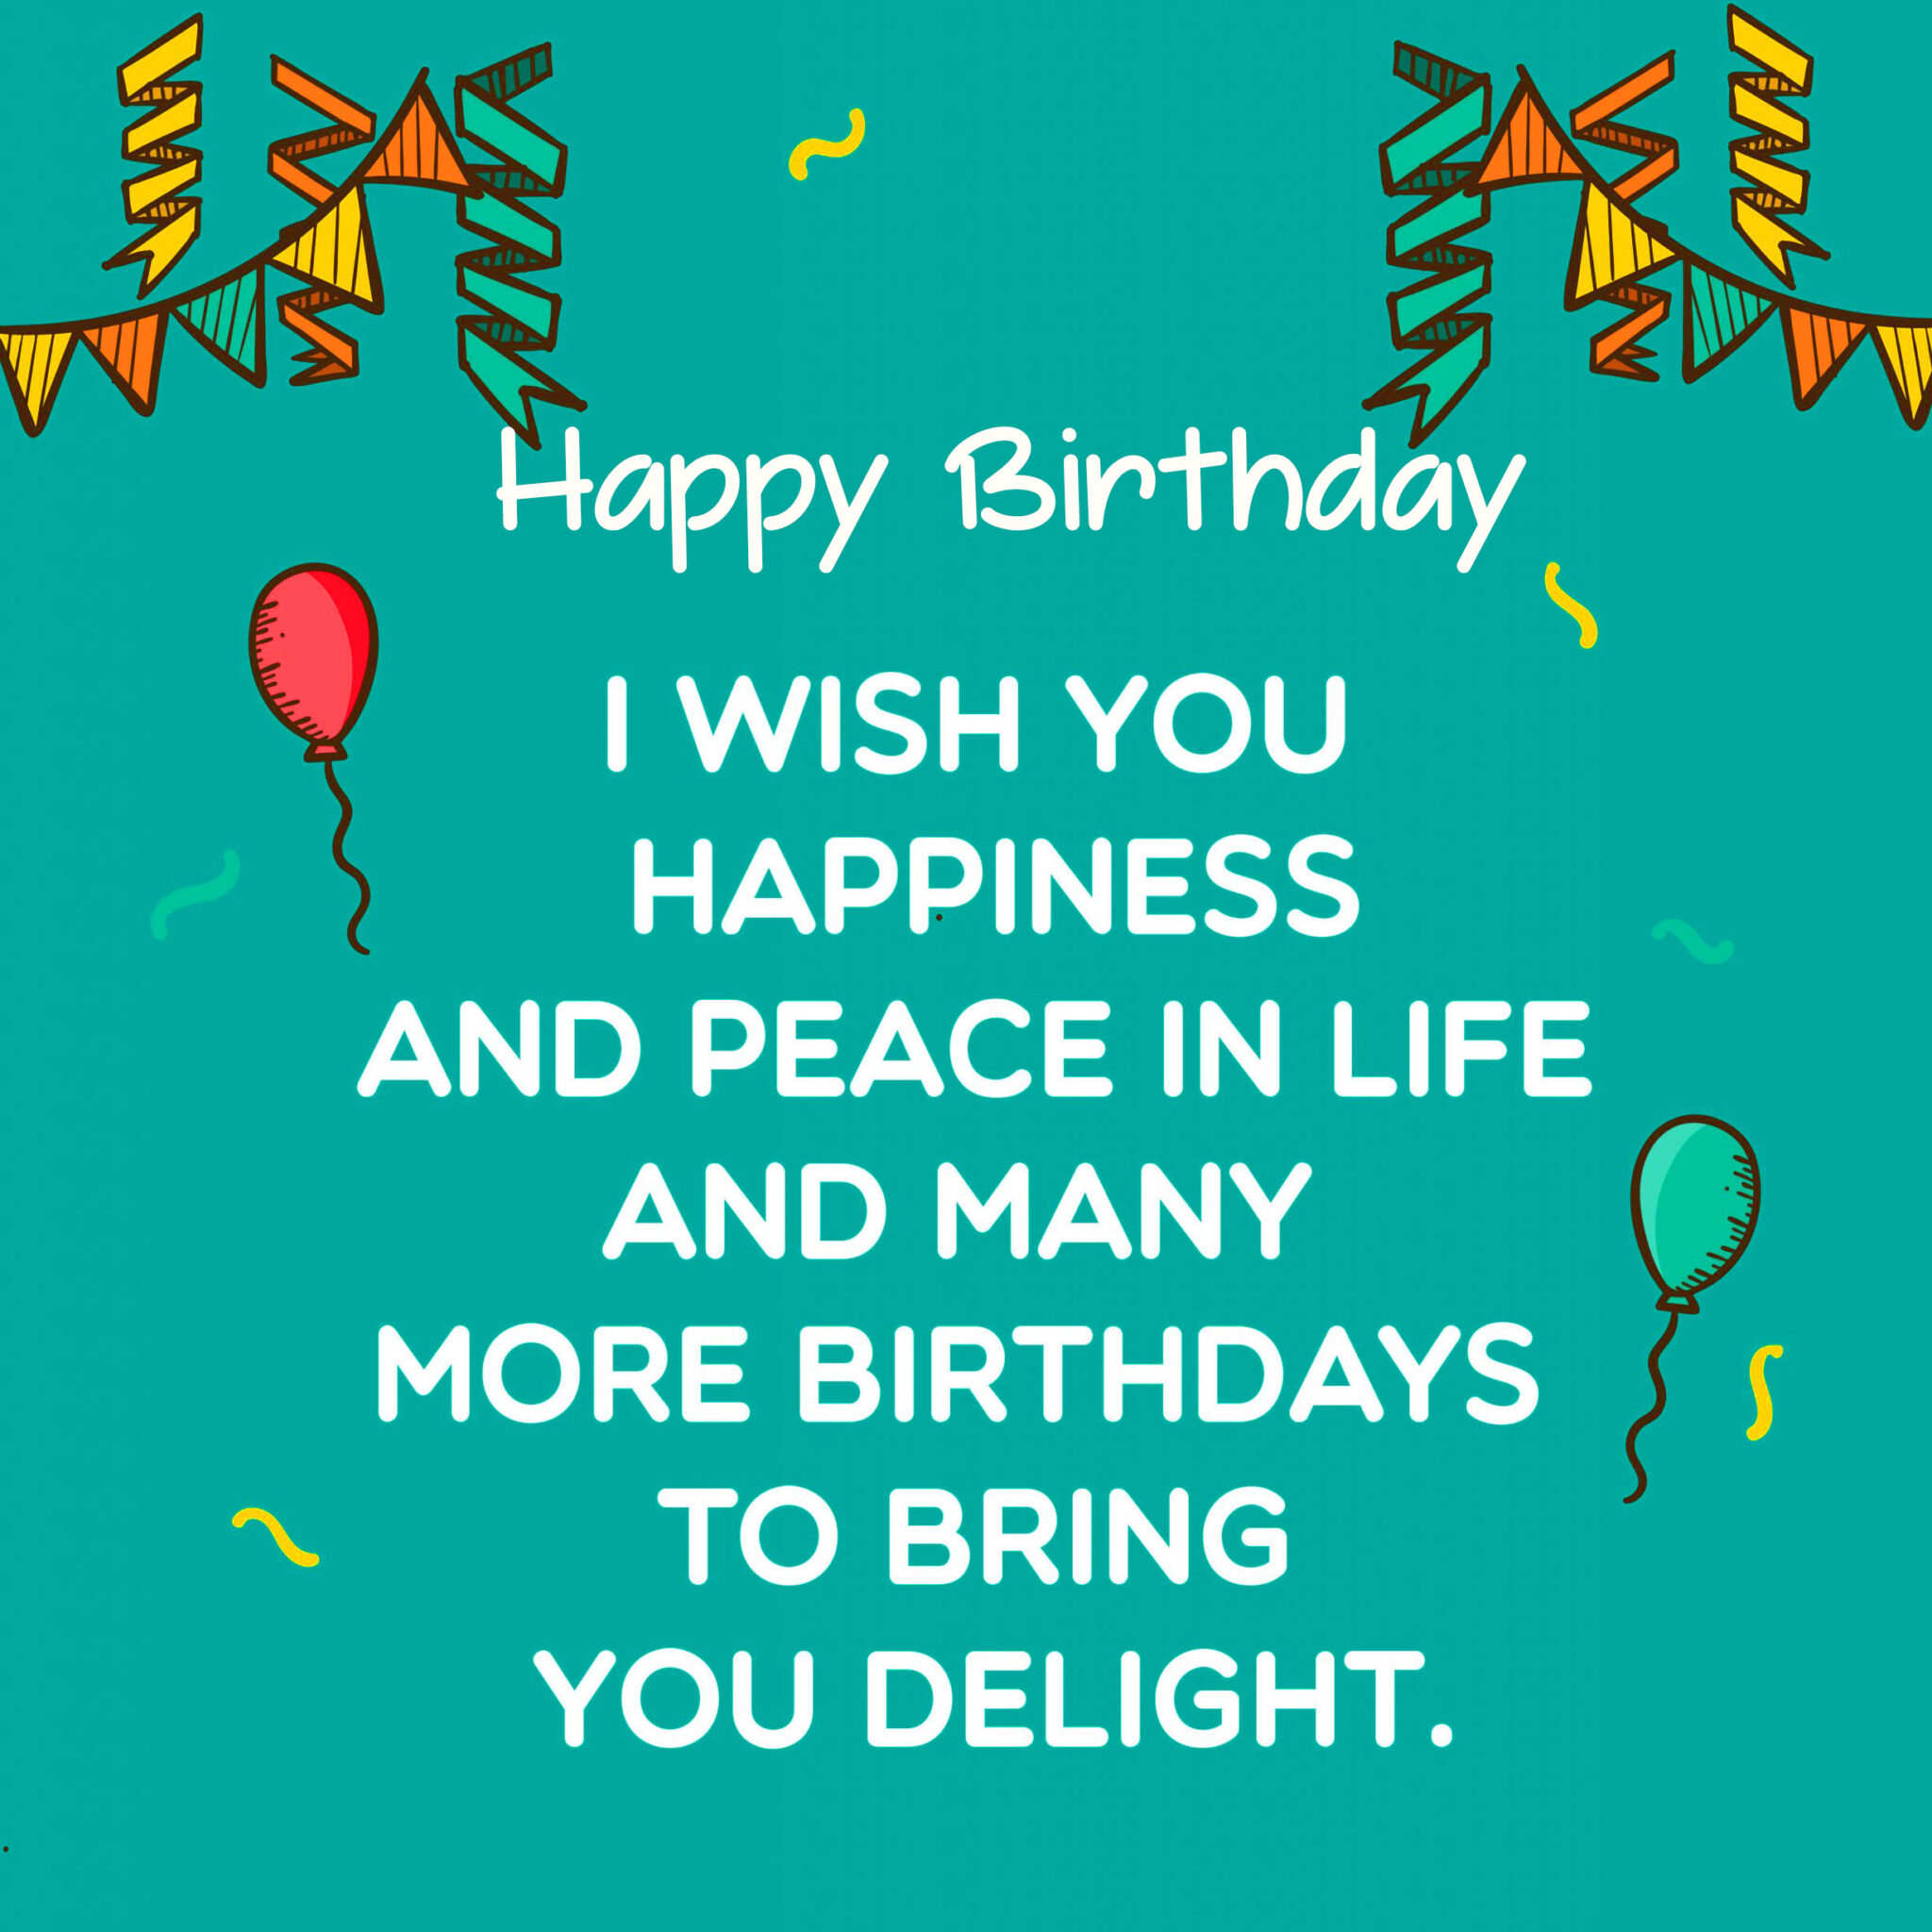 Religious Happy Birthday Images - Good Morning Images HD